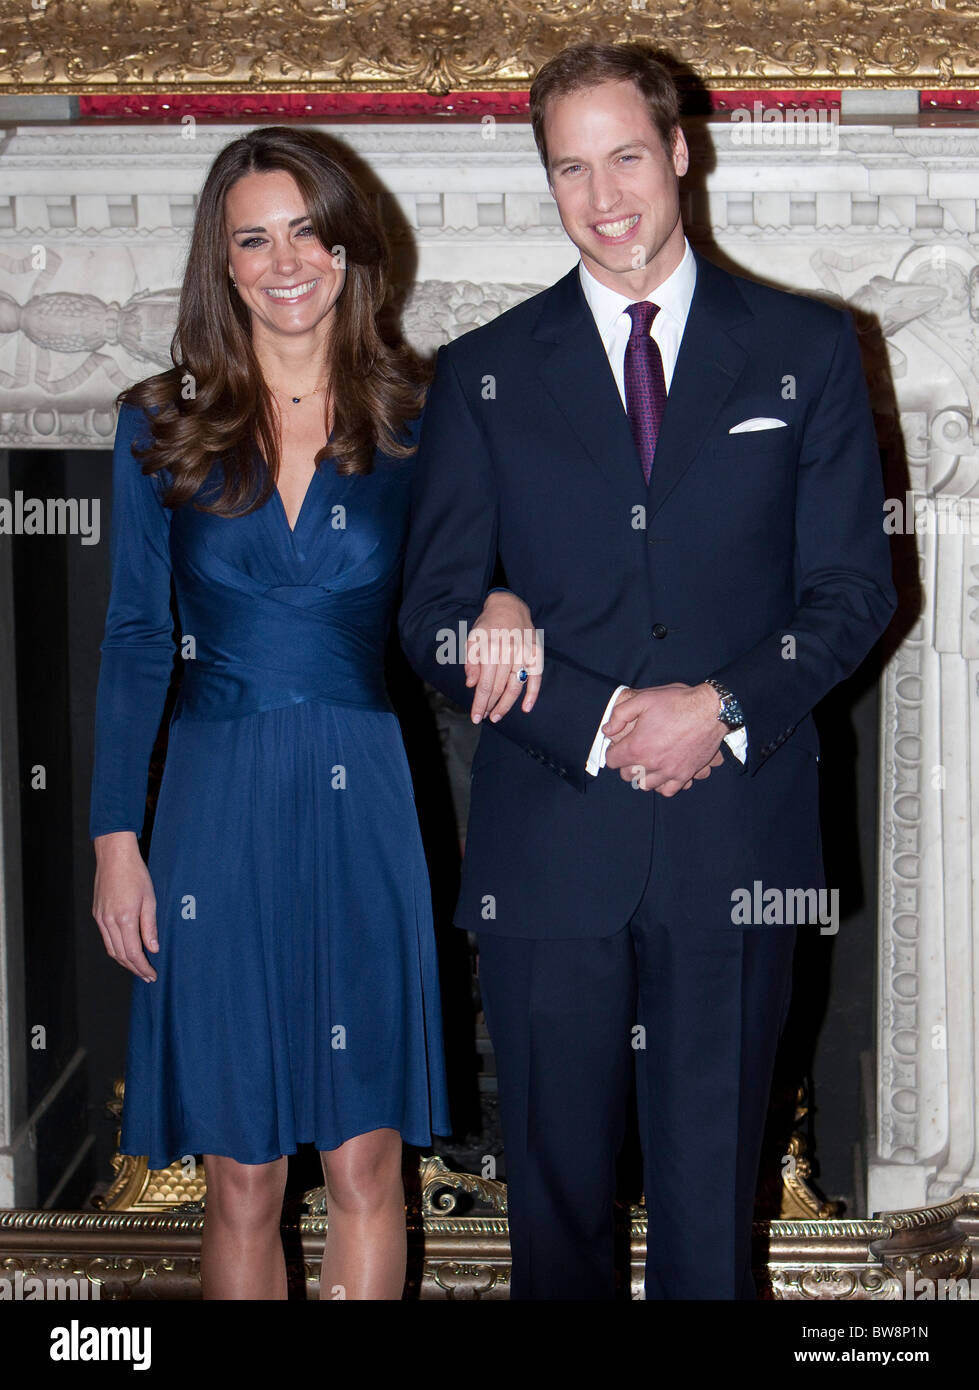 Britain's Prince William announces his engagement to Kate Middleton in the State Rooms at St James Palace in London. Stock Photo